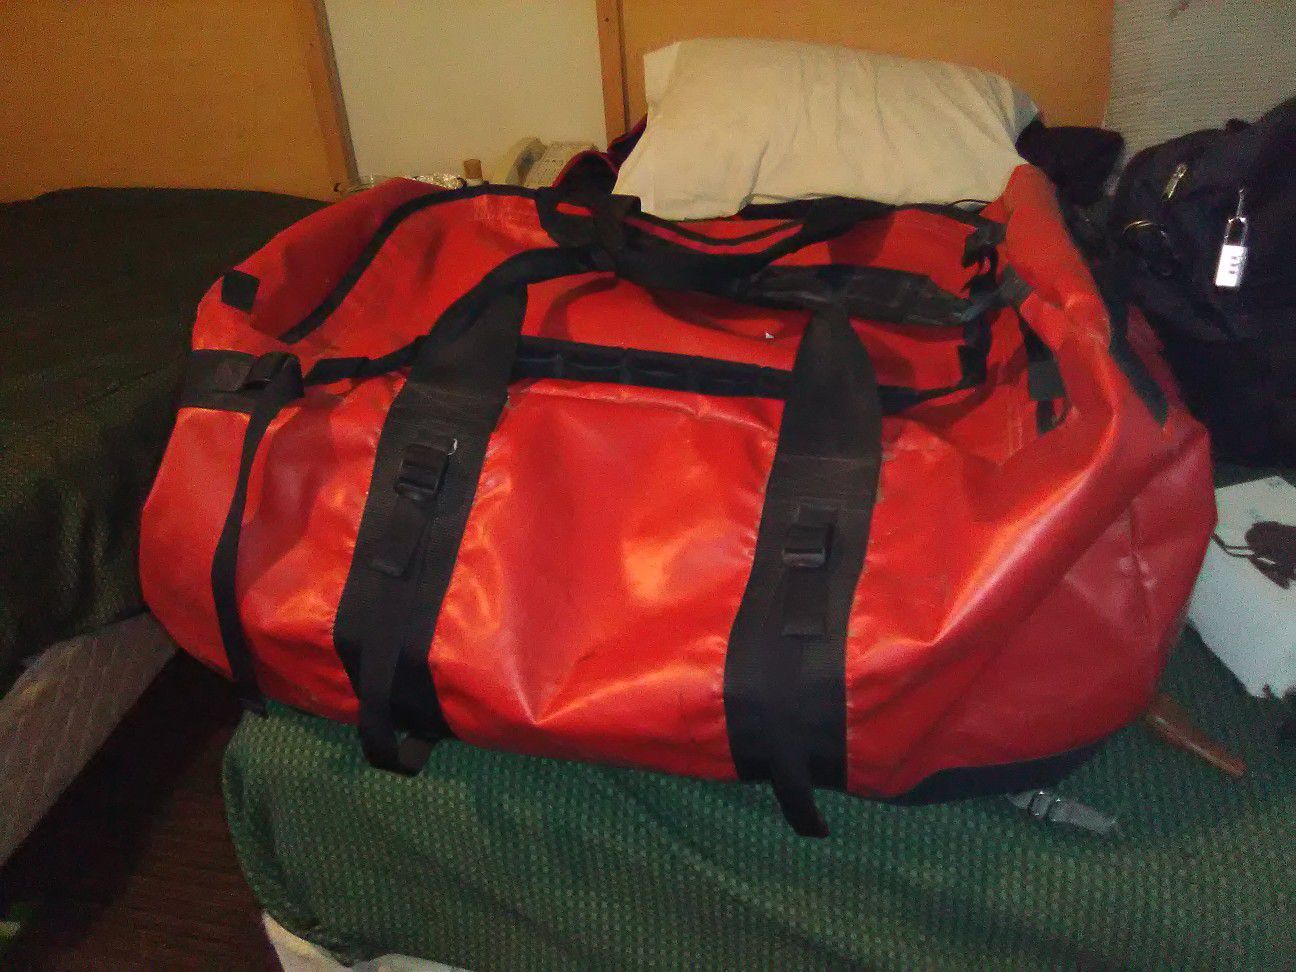 The north face duffle bag and backpack